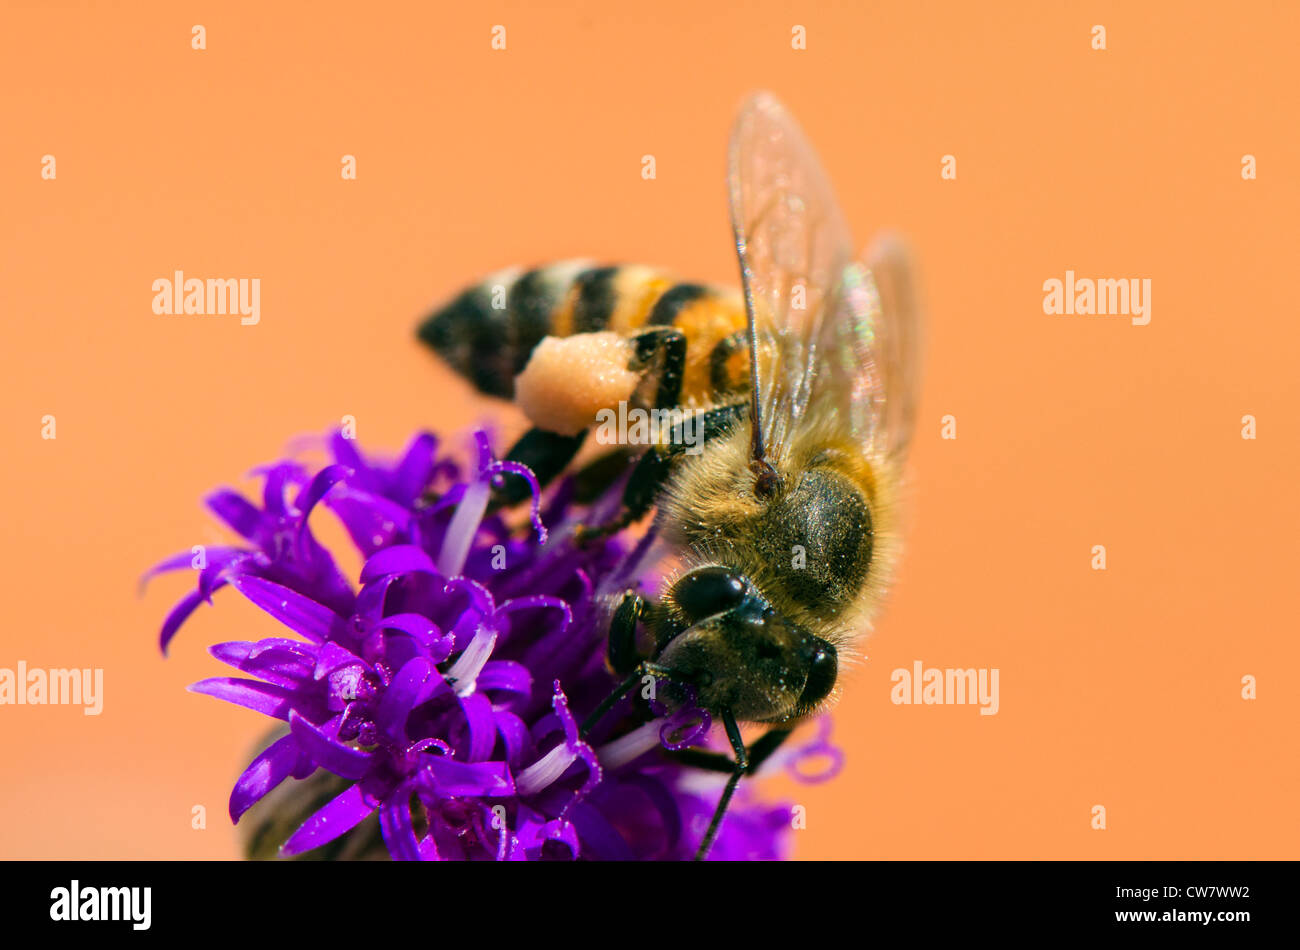 Honey bee pollinating a flower Stock Photo